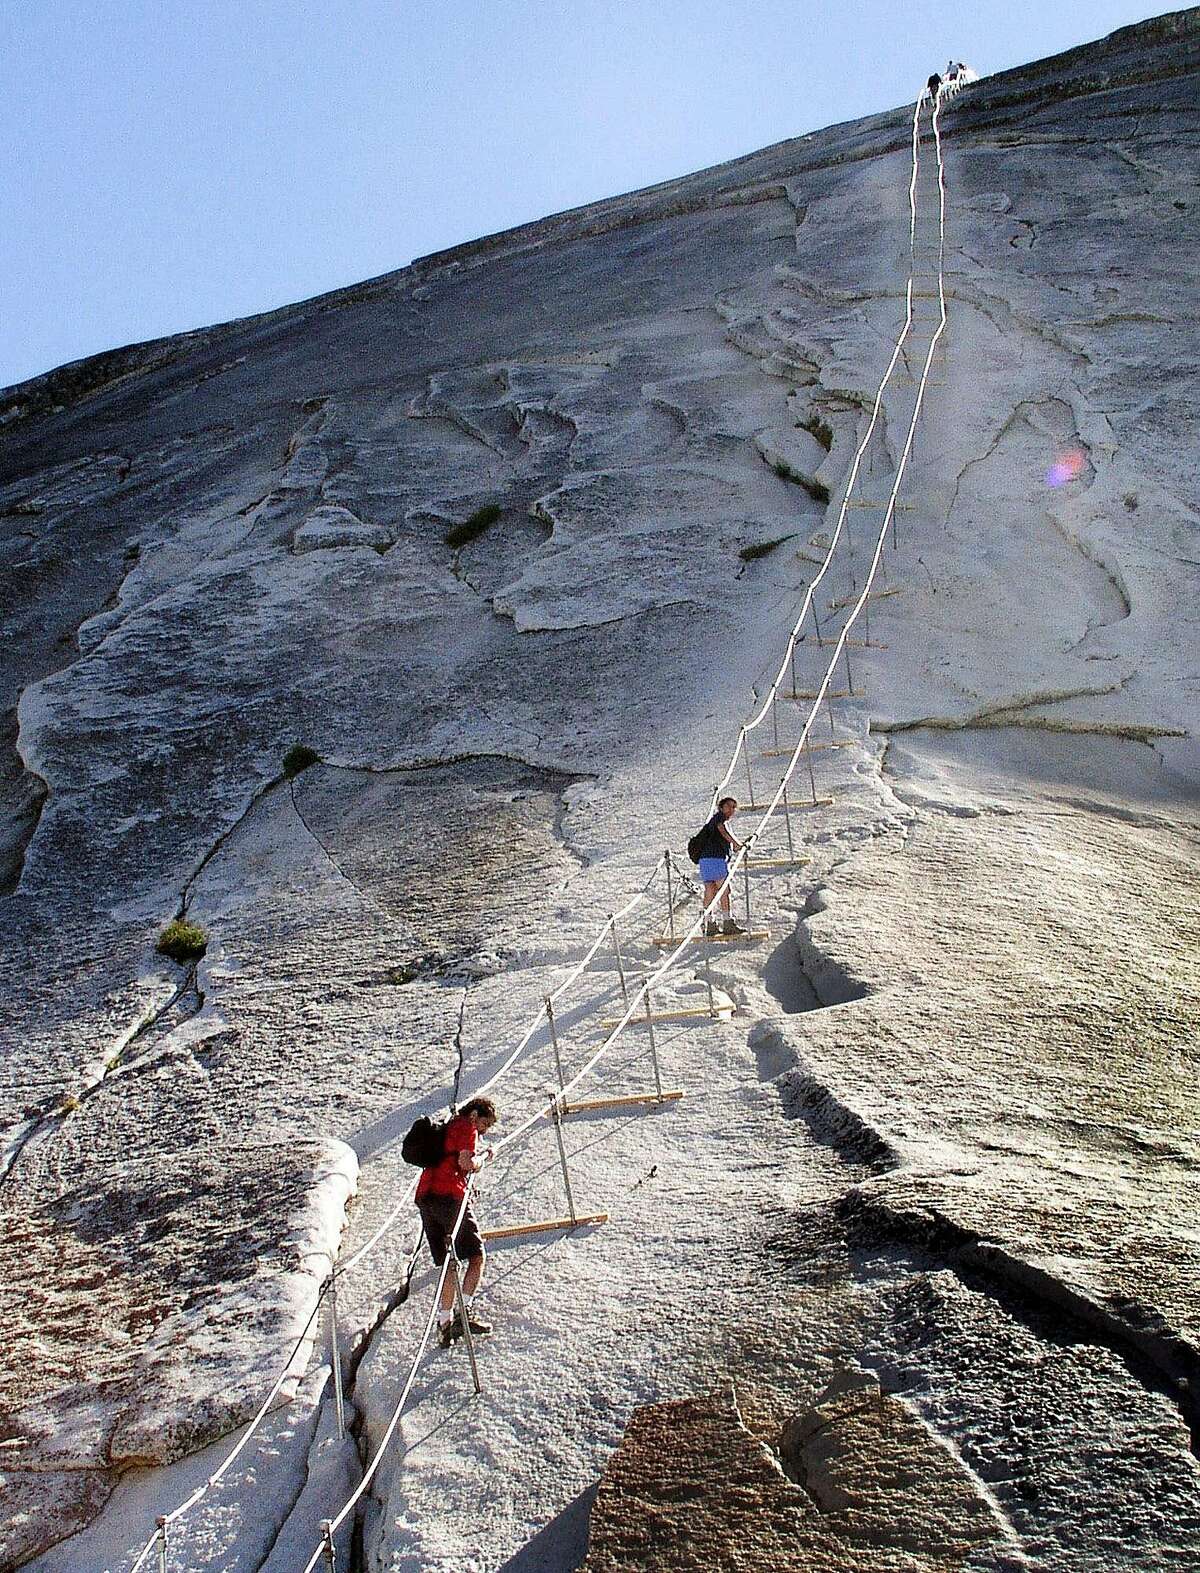 Woman, 29, dies in fall from Half Dome cables in Yosemite